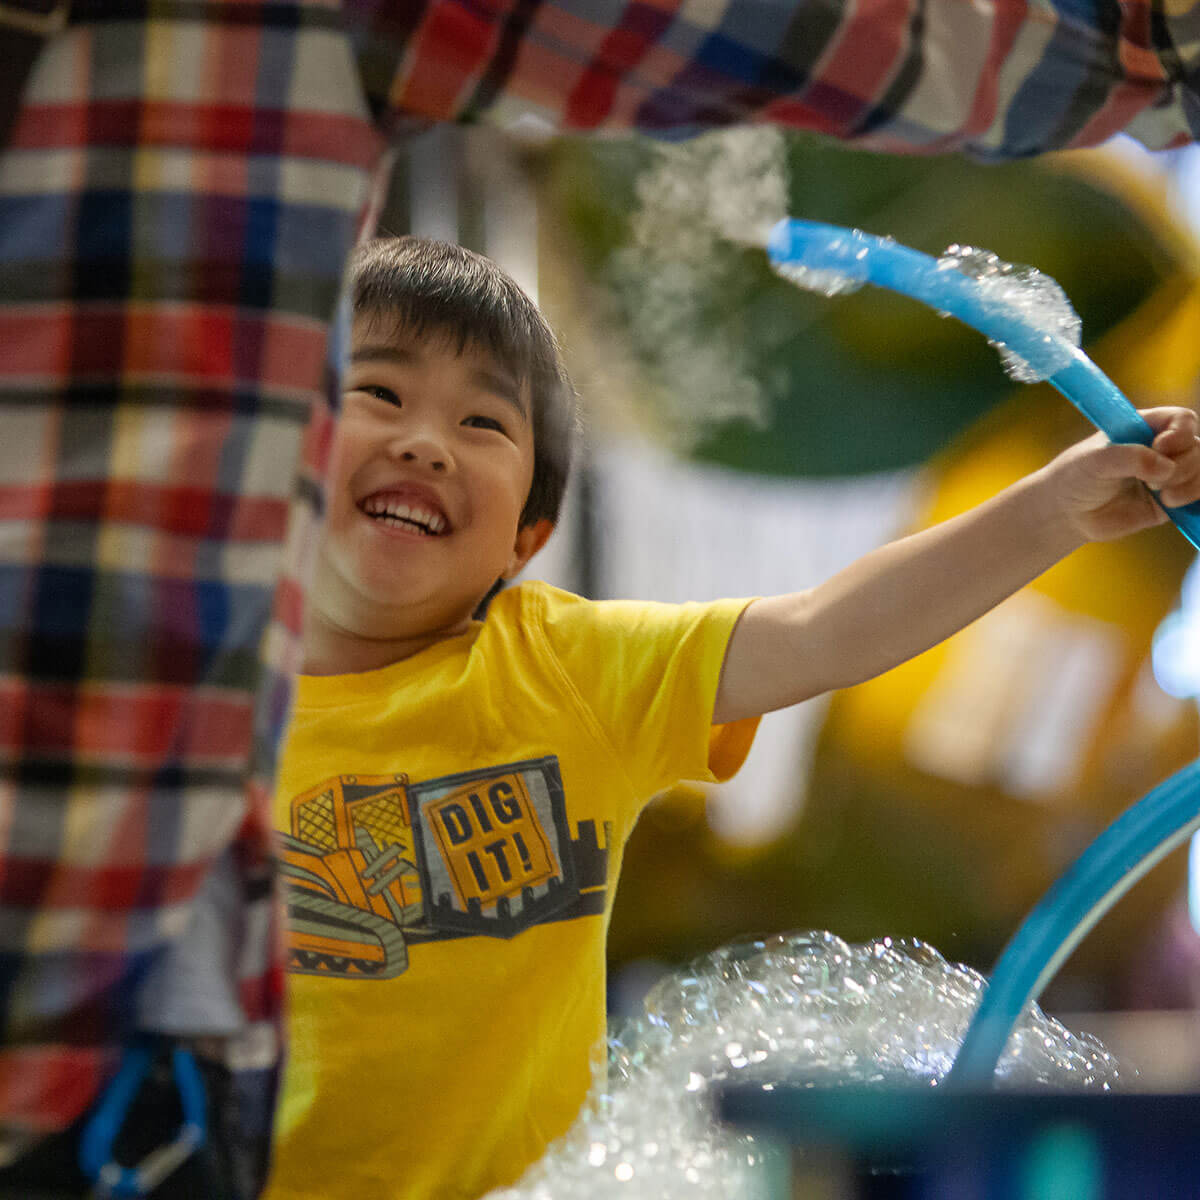 A child smiles at an adult as he plays in the bubble exhibit